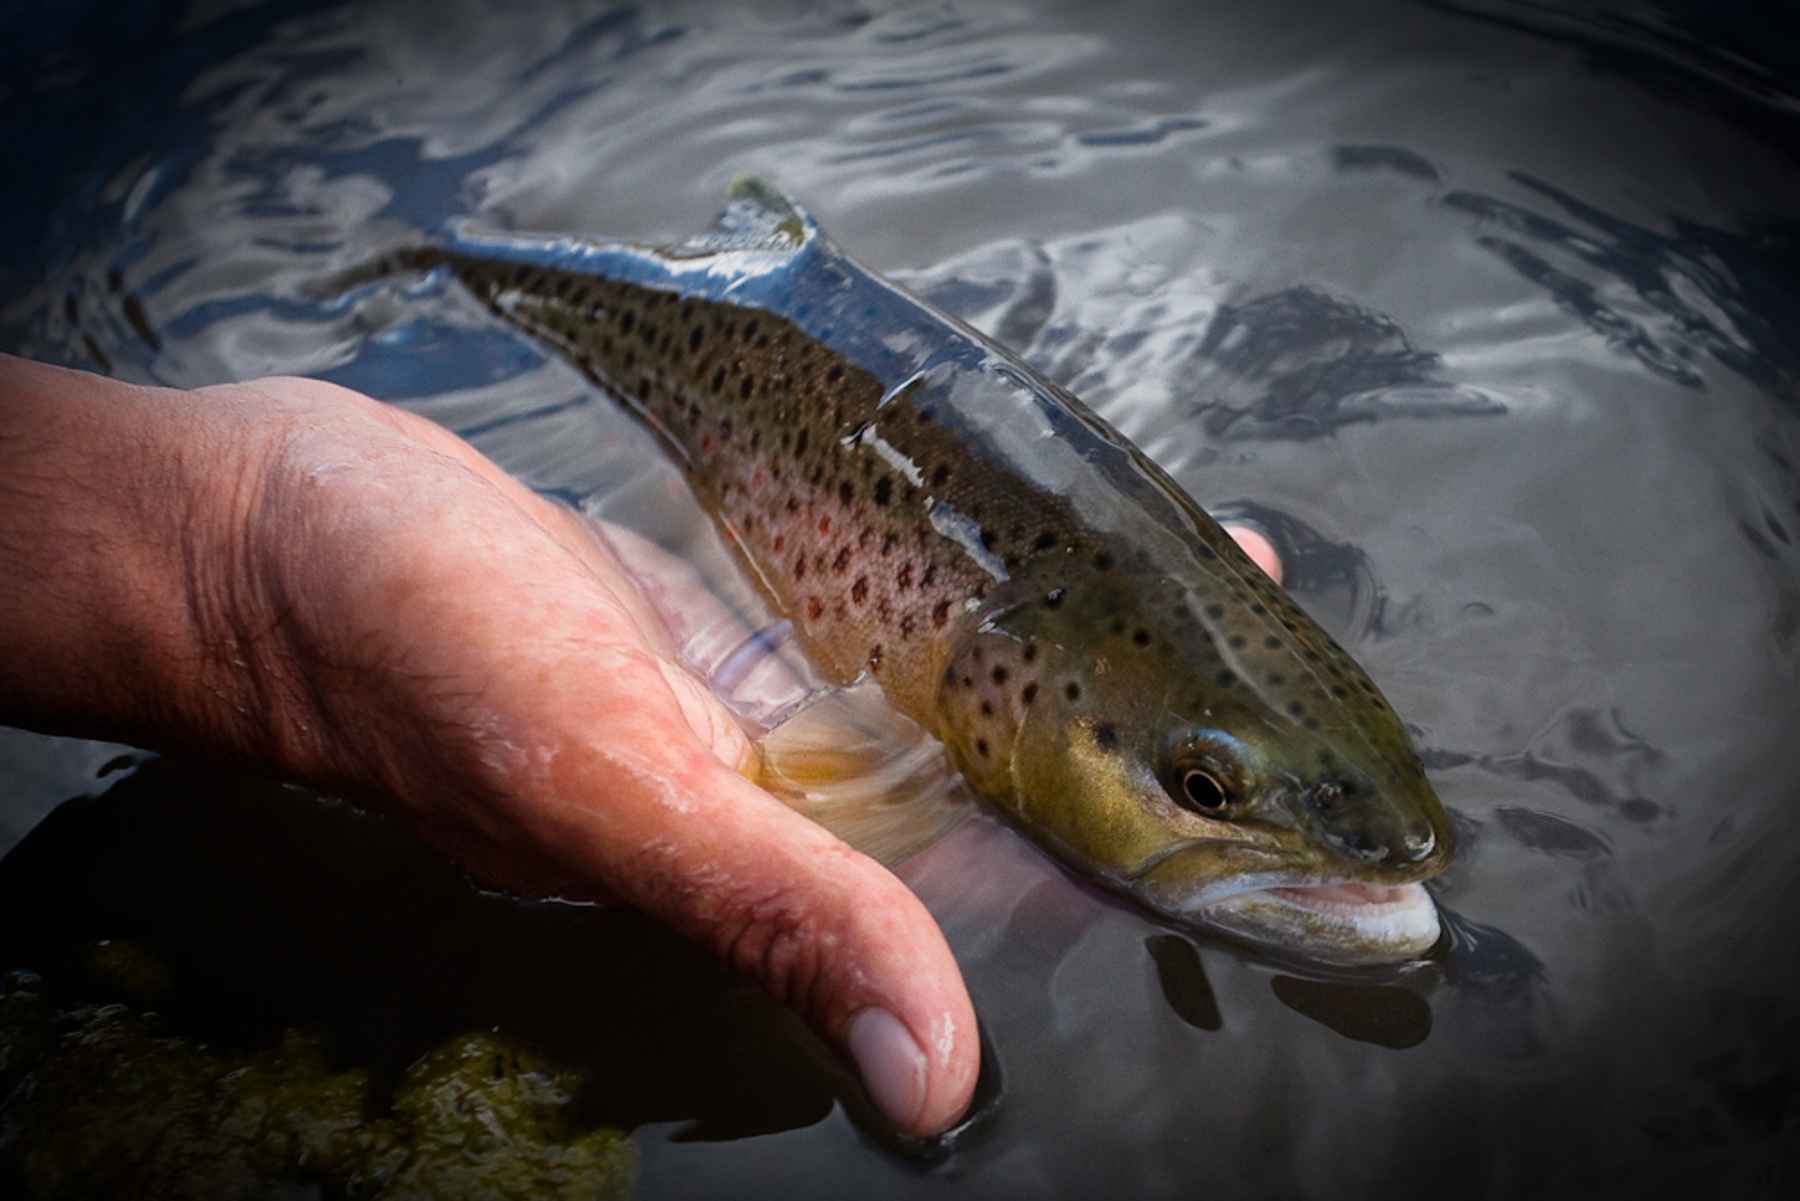 http://www.hatchmag.com/sites/default/files/styles/extra-large/public/gardinerbrown.jpg